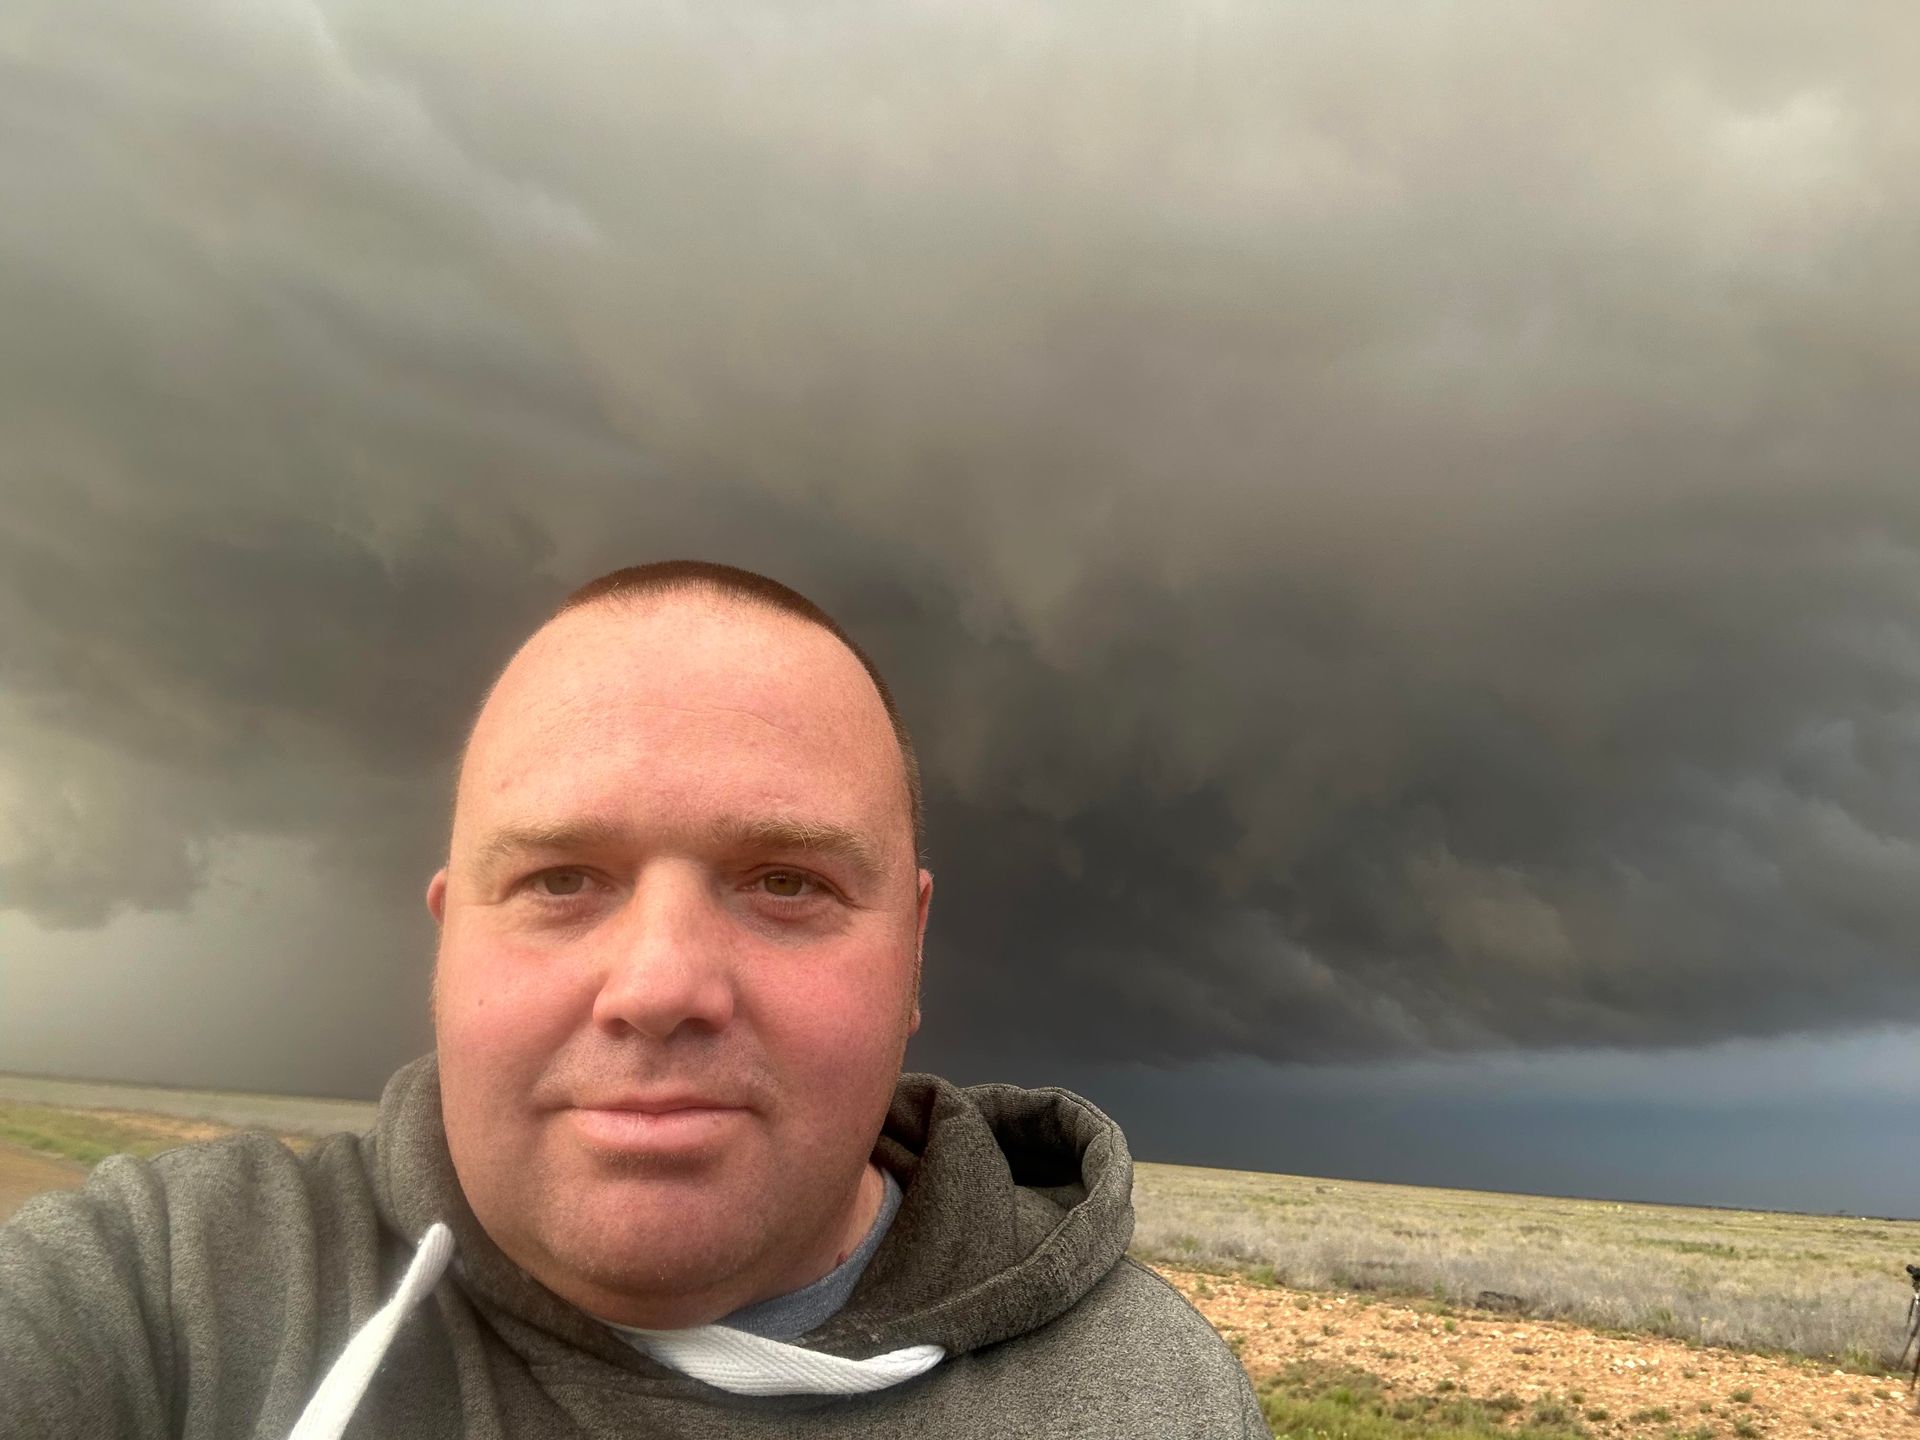 A man is taking a selfie in front of a cloudy sky.